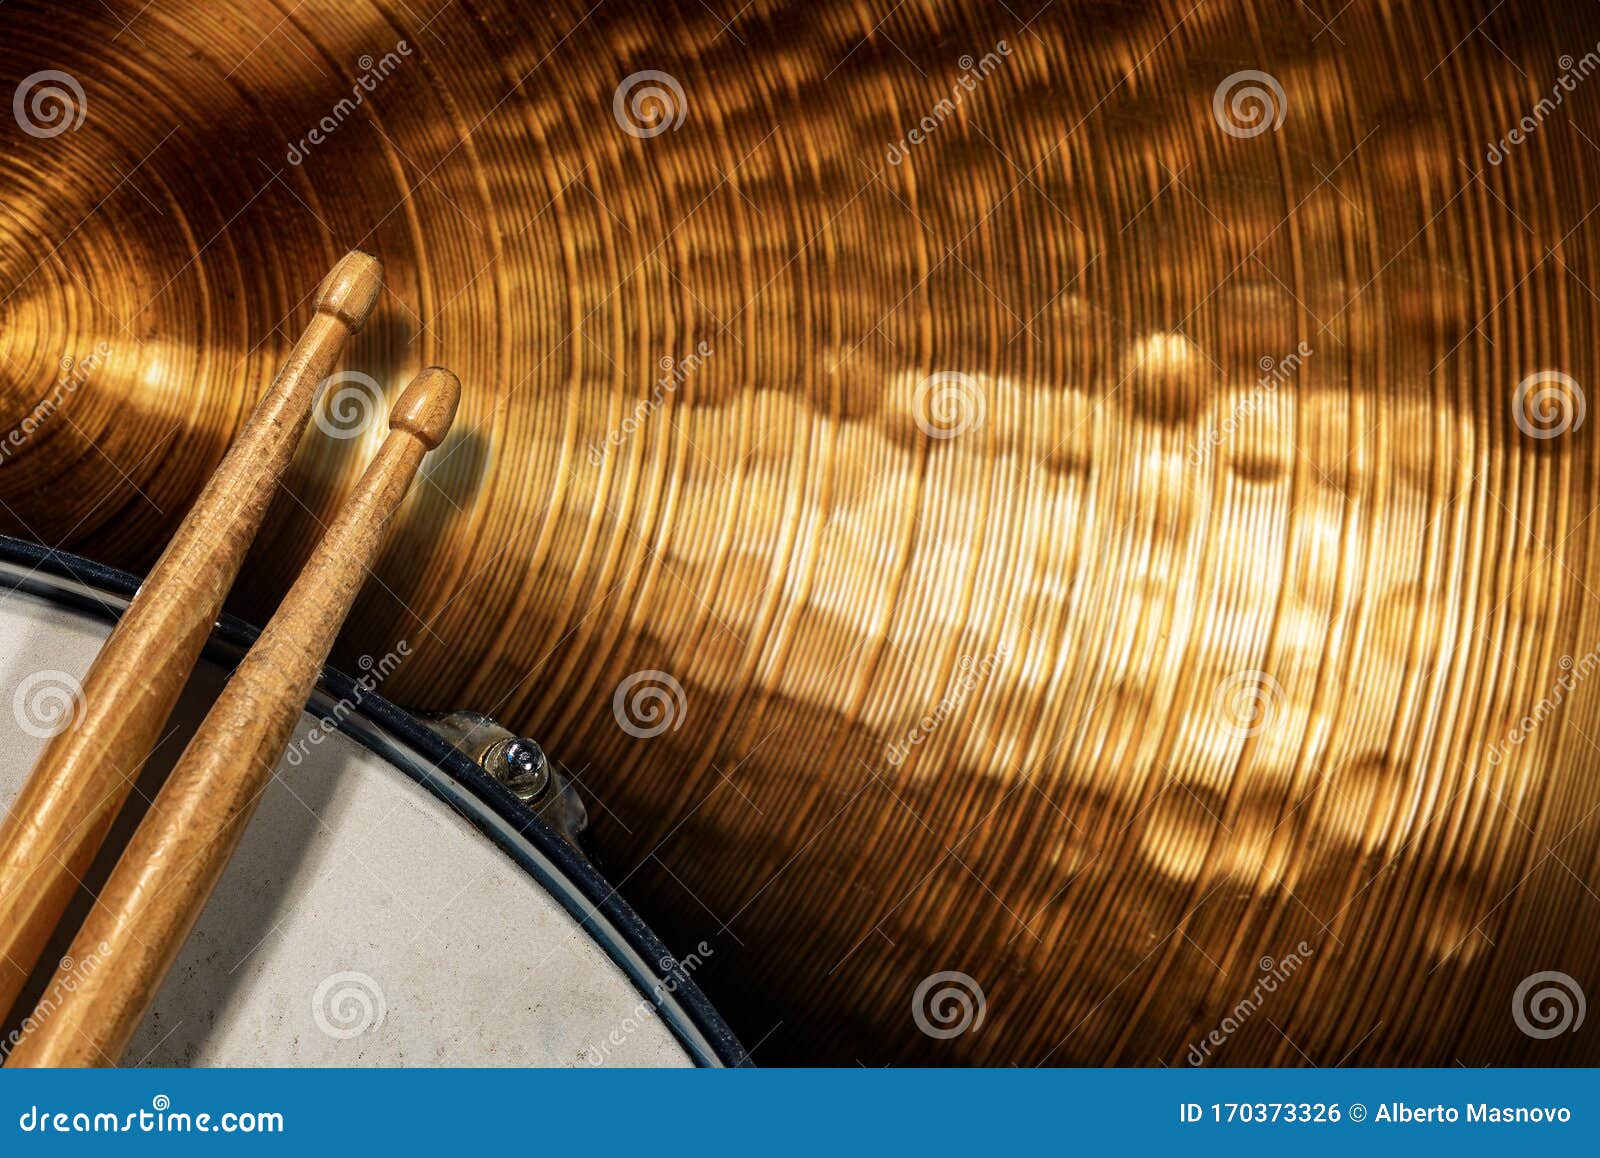 two wooden drumsticks on a snare drum and golden cymbal - percussion instrument